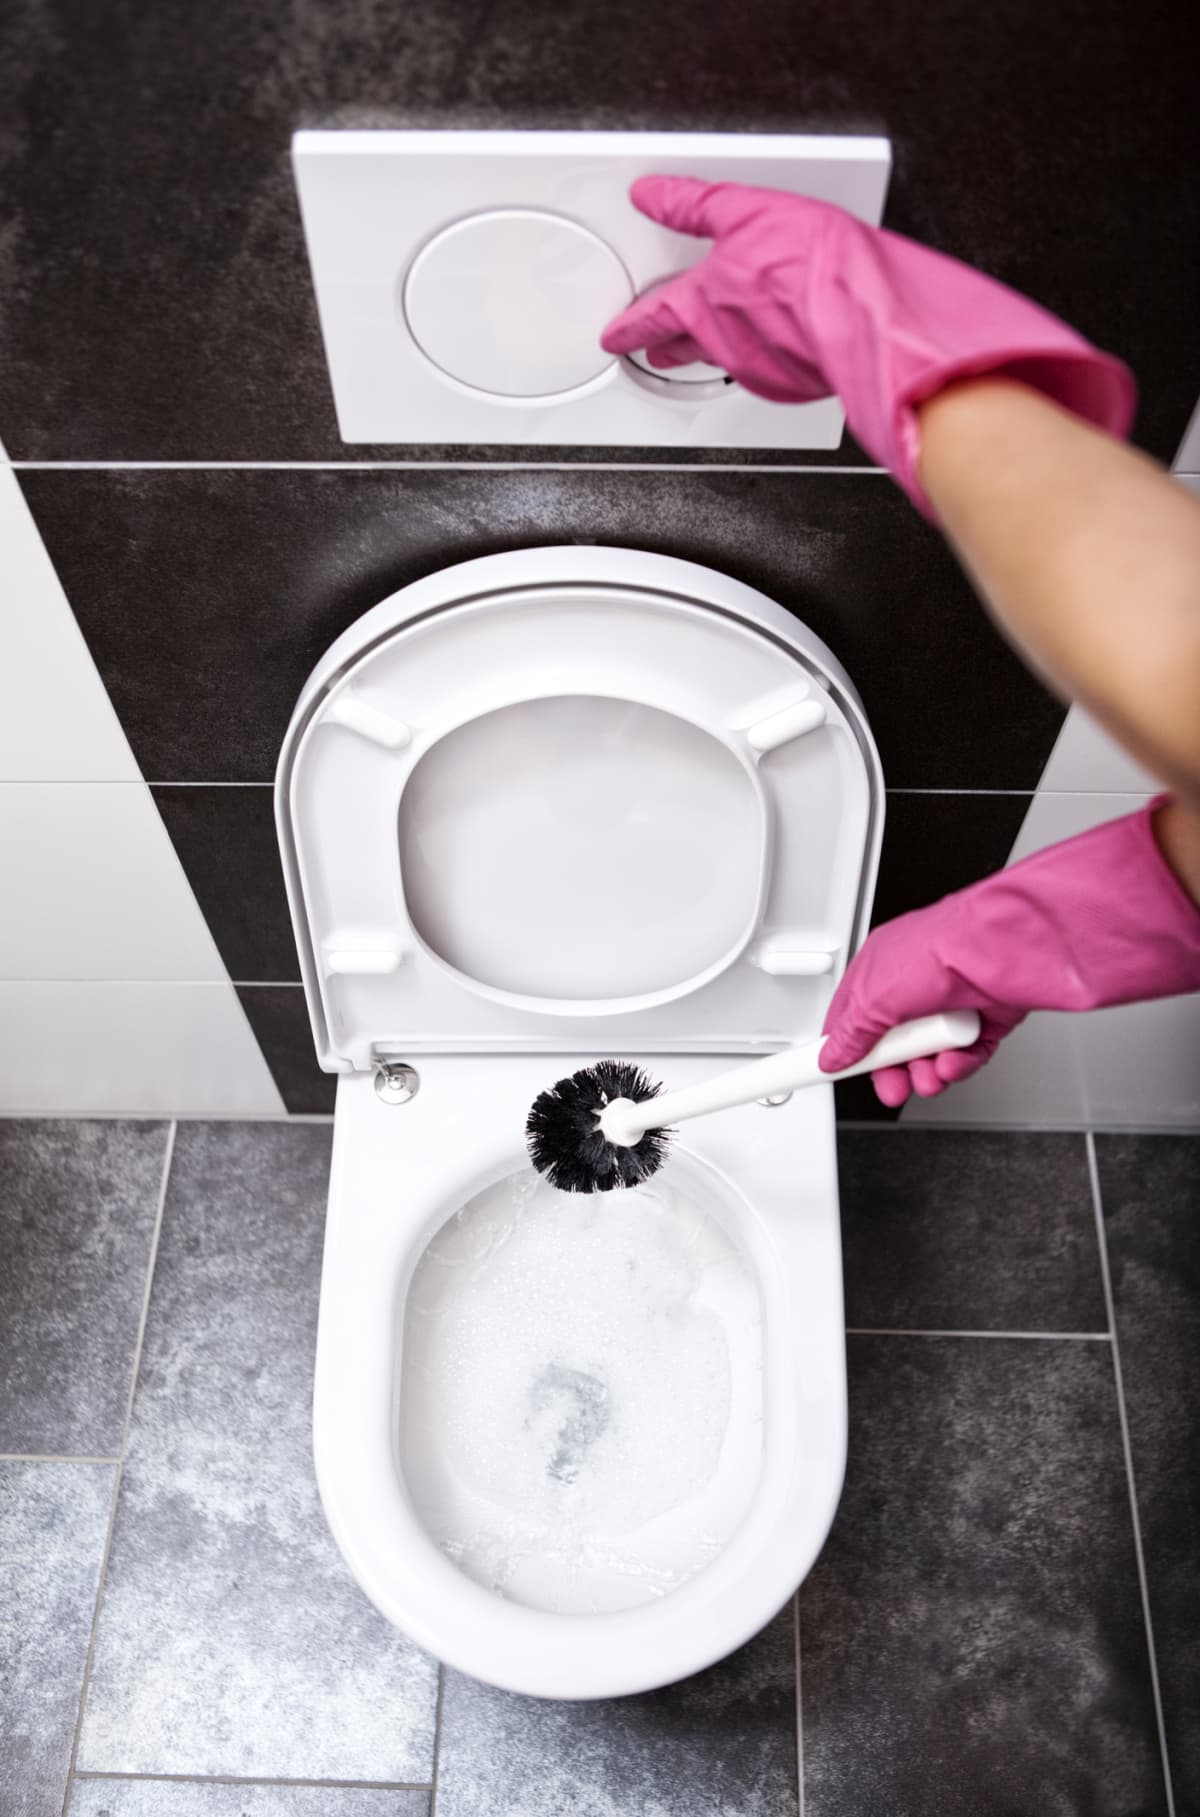 A person cleaning toilet with brush